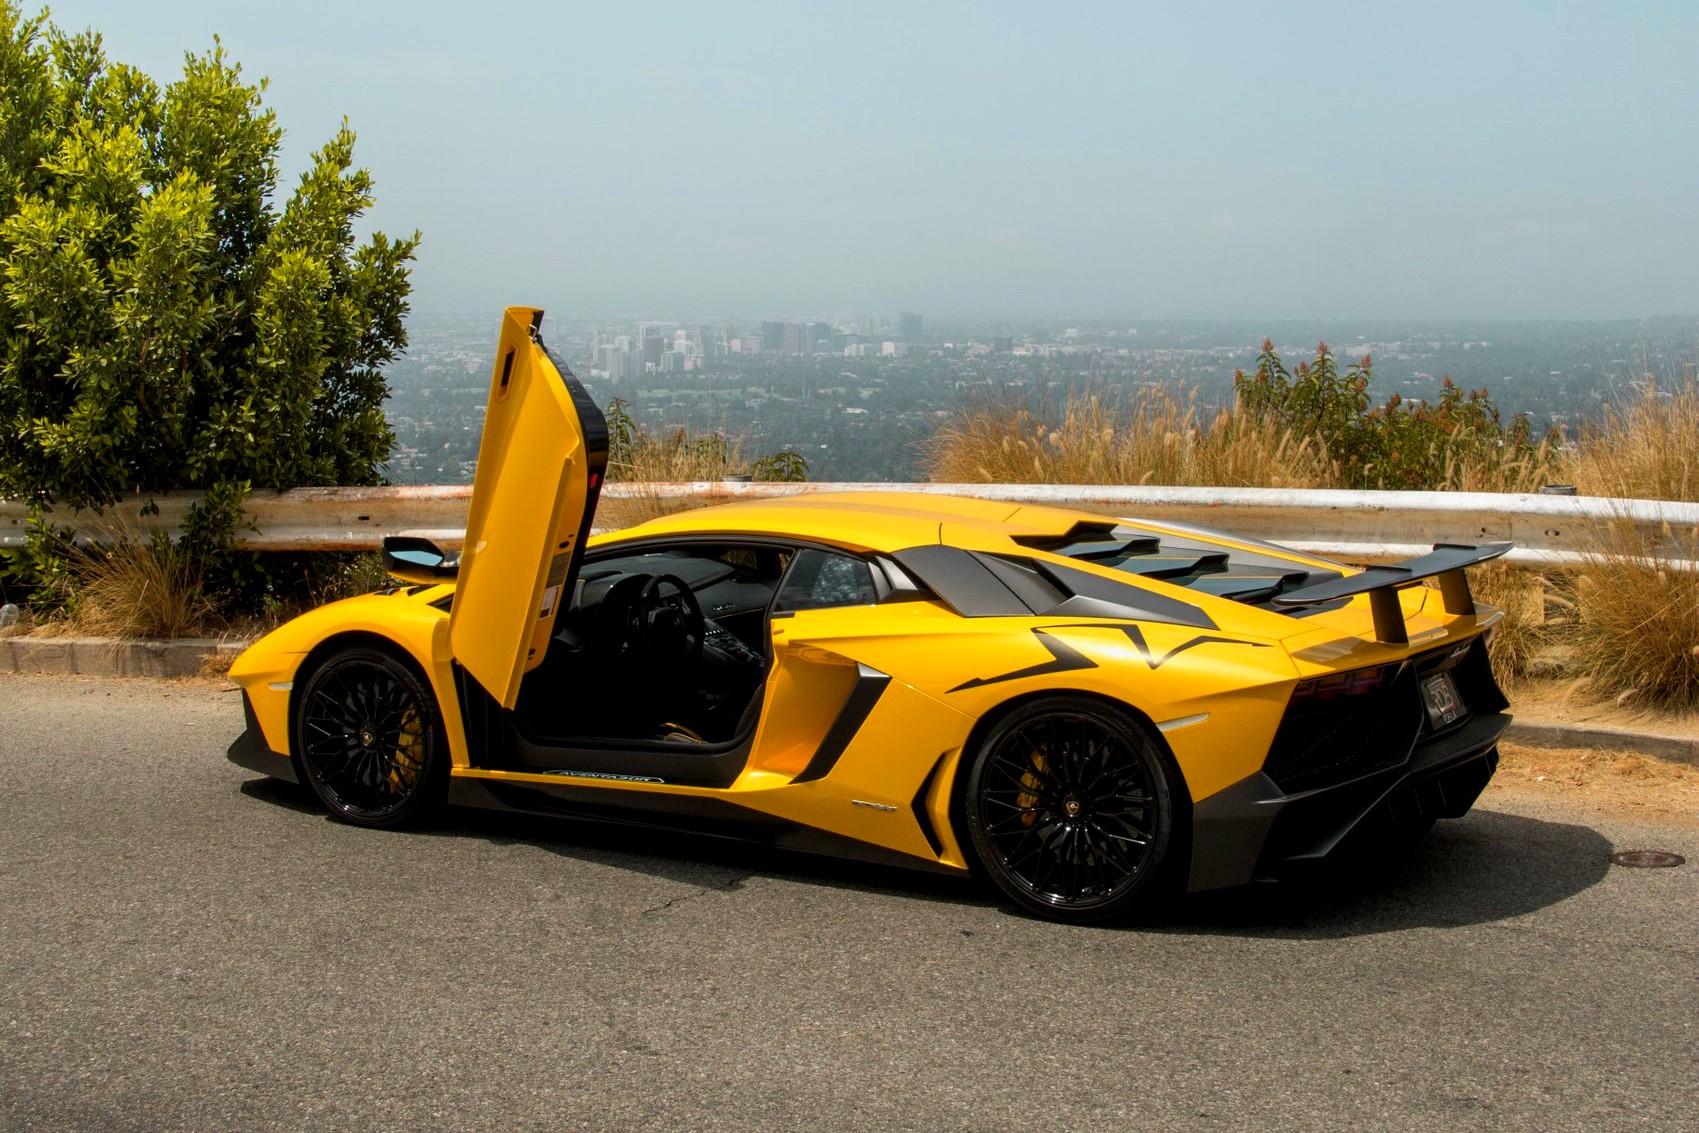 Top 35 Exotic Cars Jamesedition